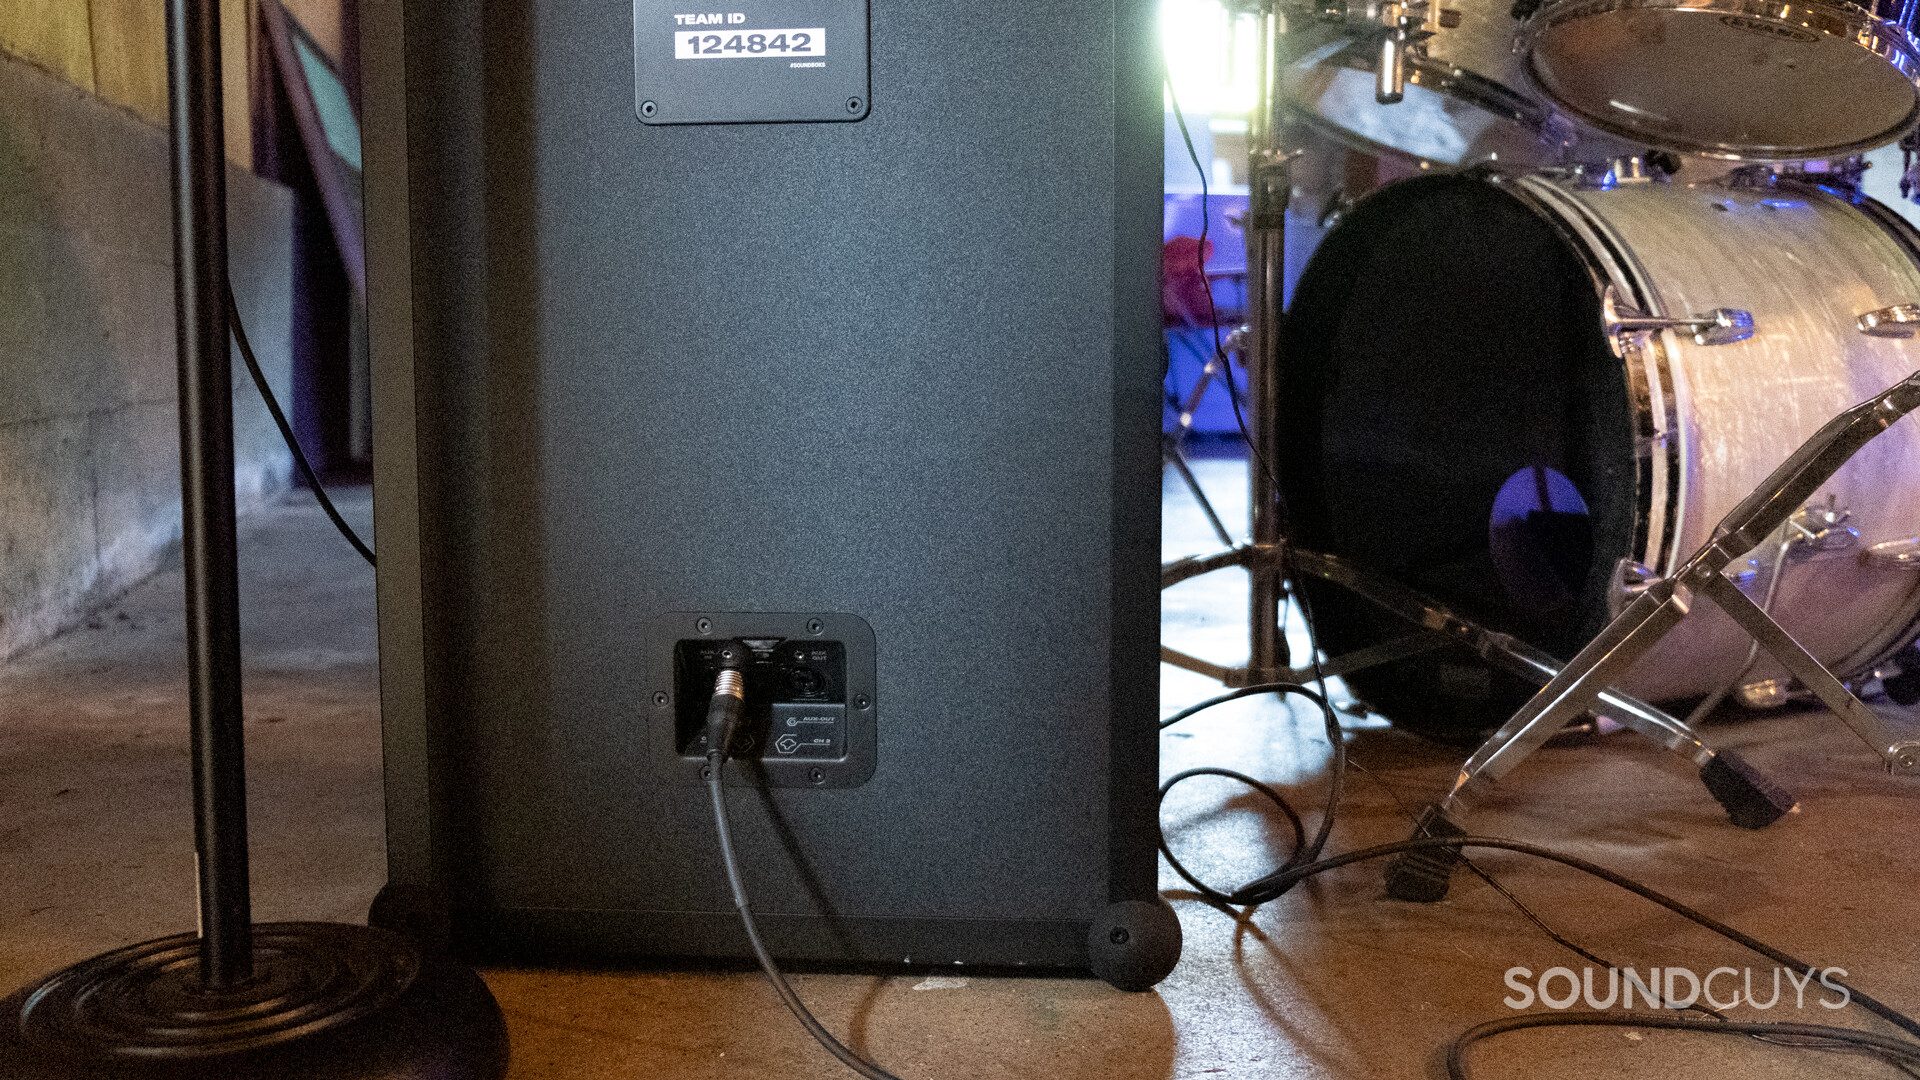 Back of SoundBoks (Gen. 3) with an XLR cable plugged in. A drum kit and microphone stand are visible.